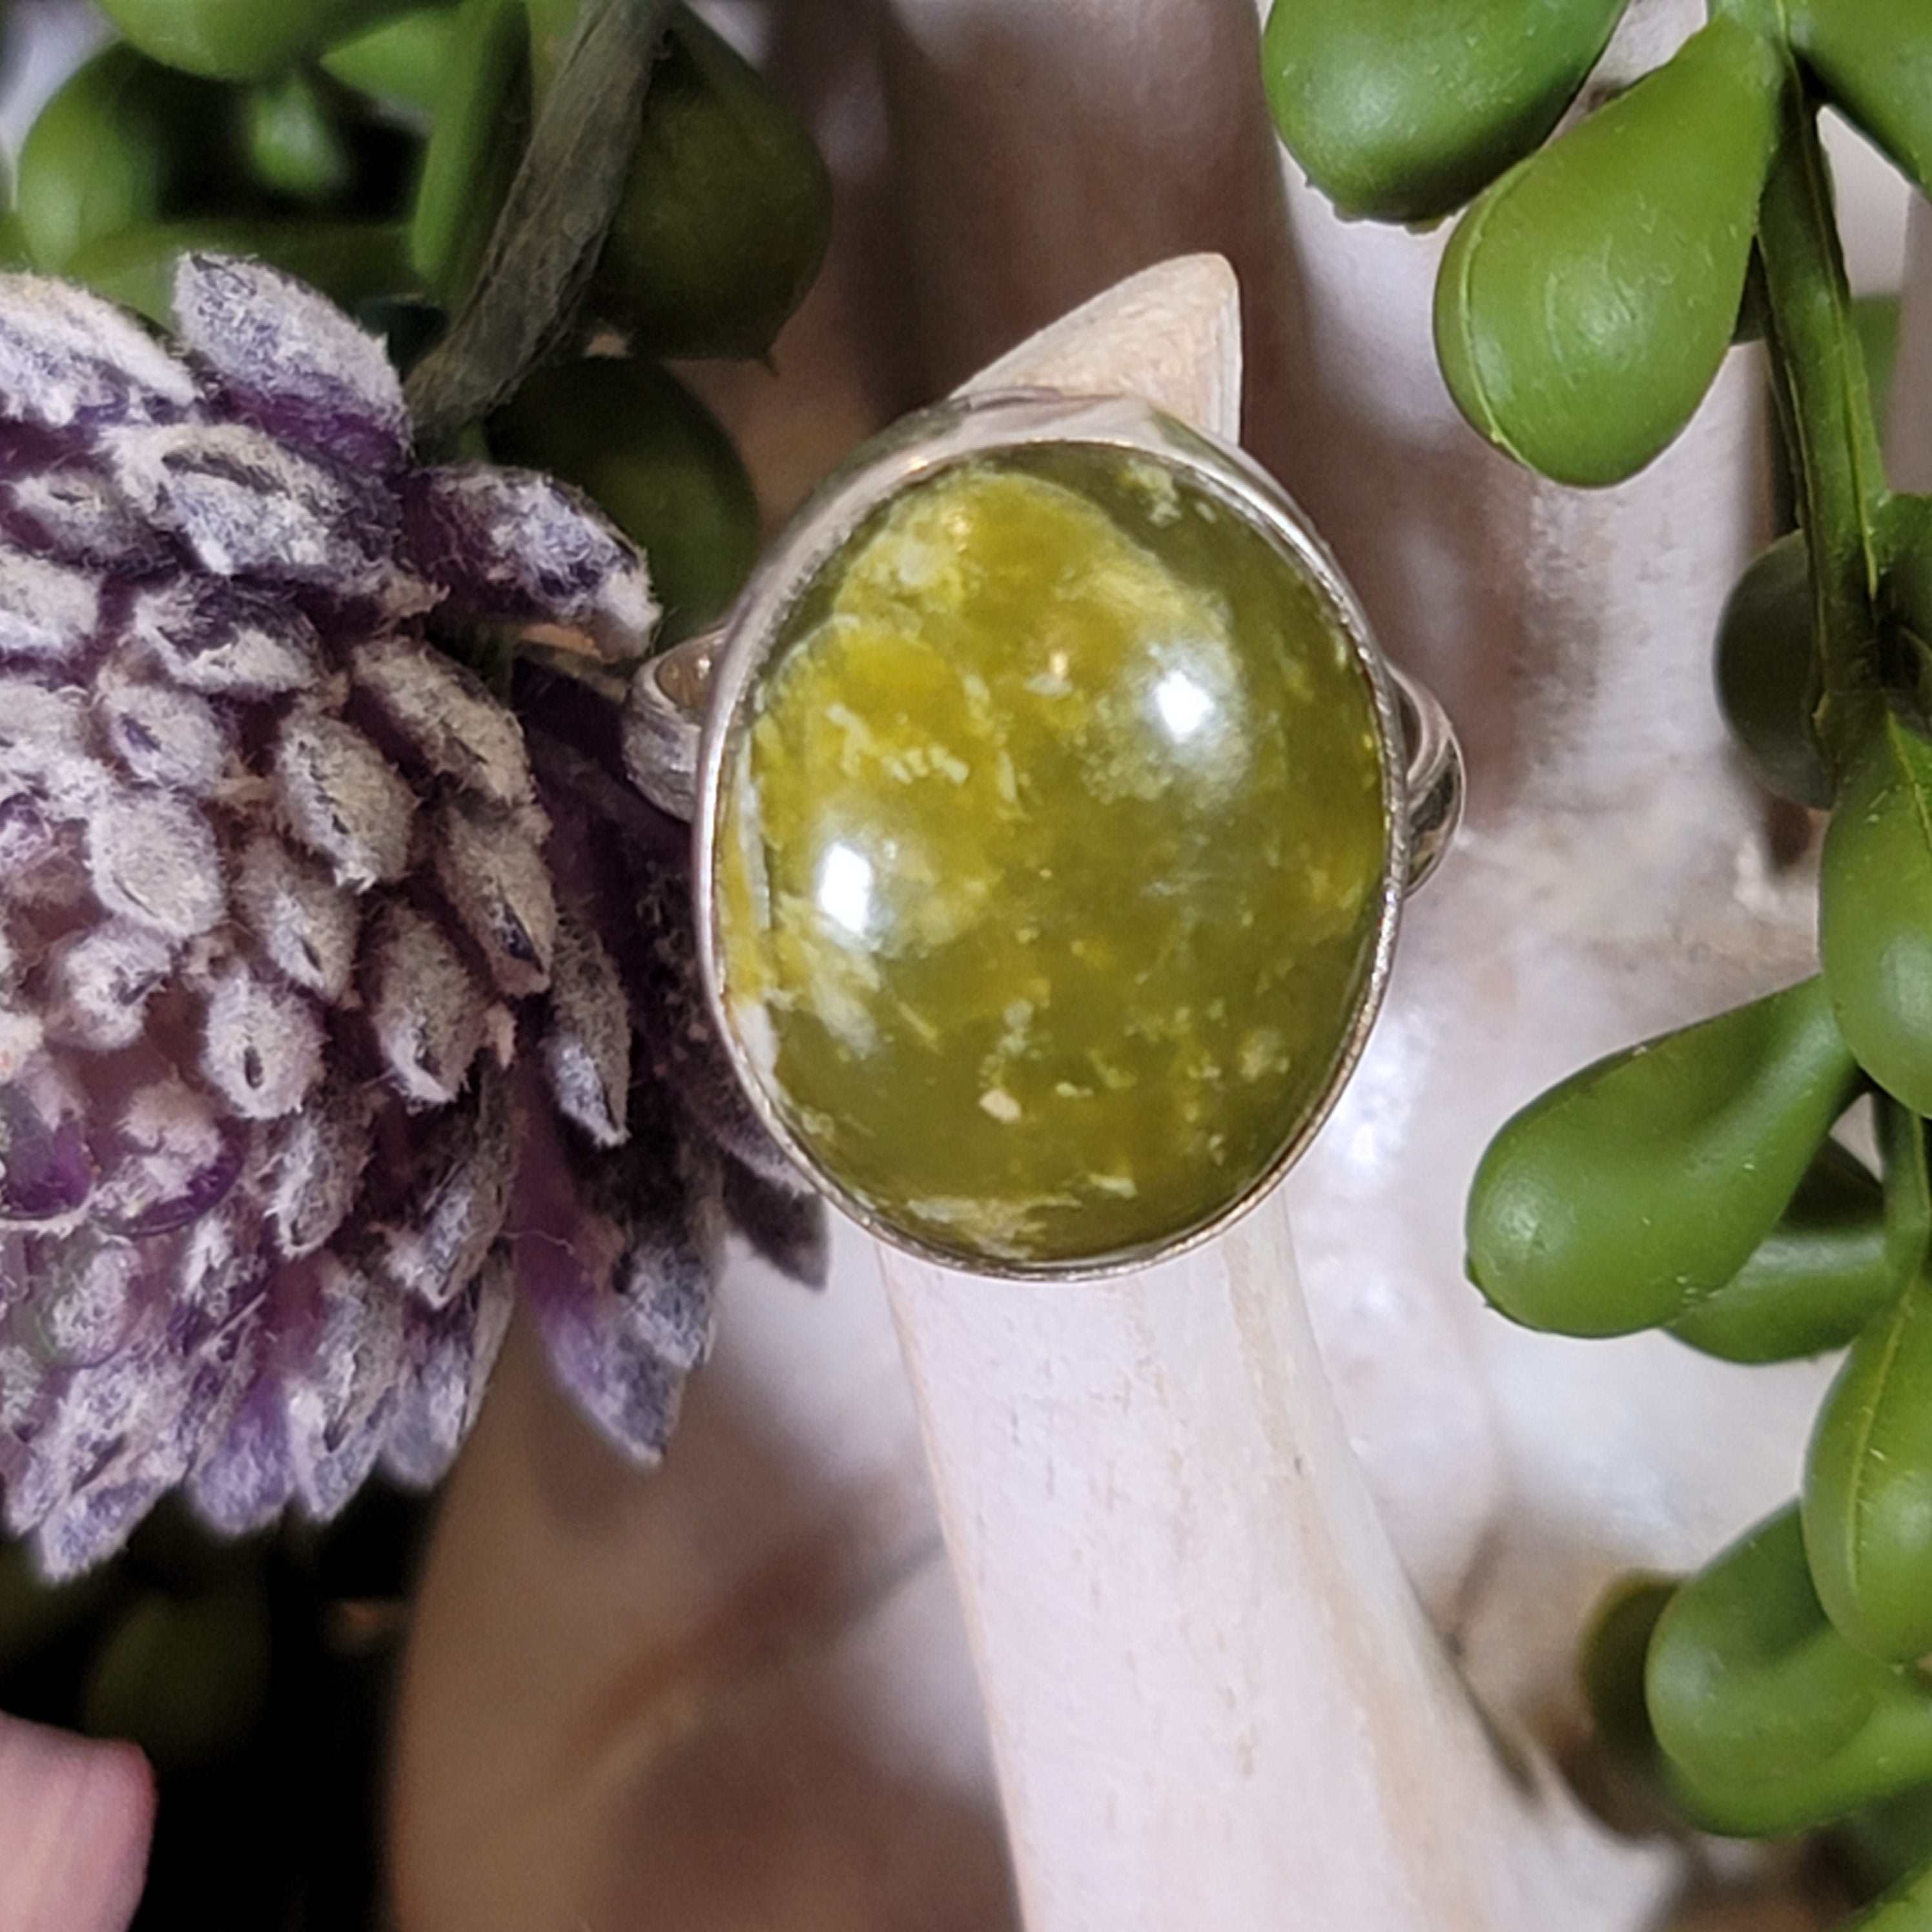 Vesuvianite Adjustable Ring .925 Silver for Courage, Growth and Change